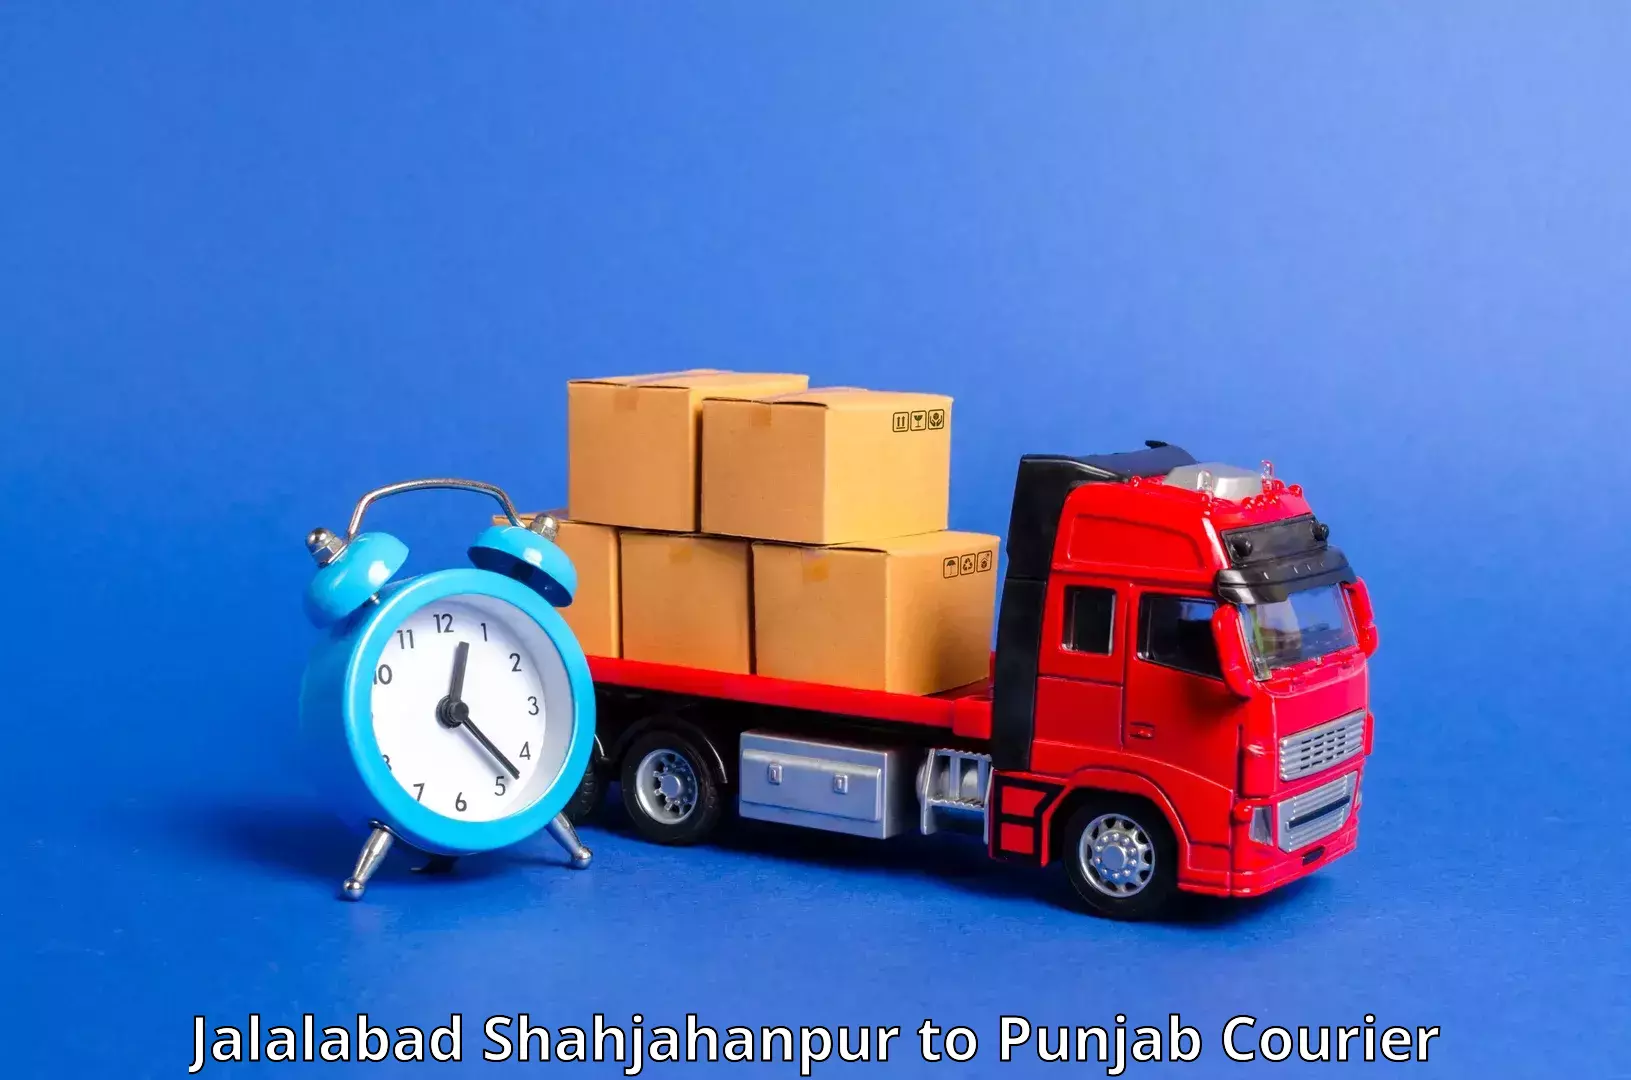 Full-service courier options Jalalabad Shahjahanpur to Pathankot